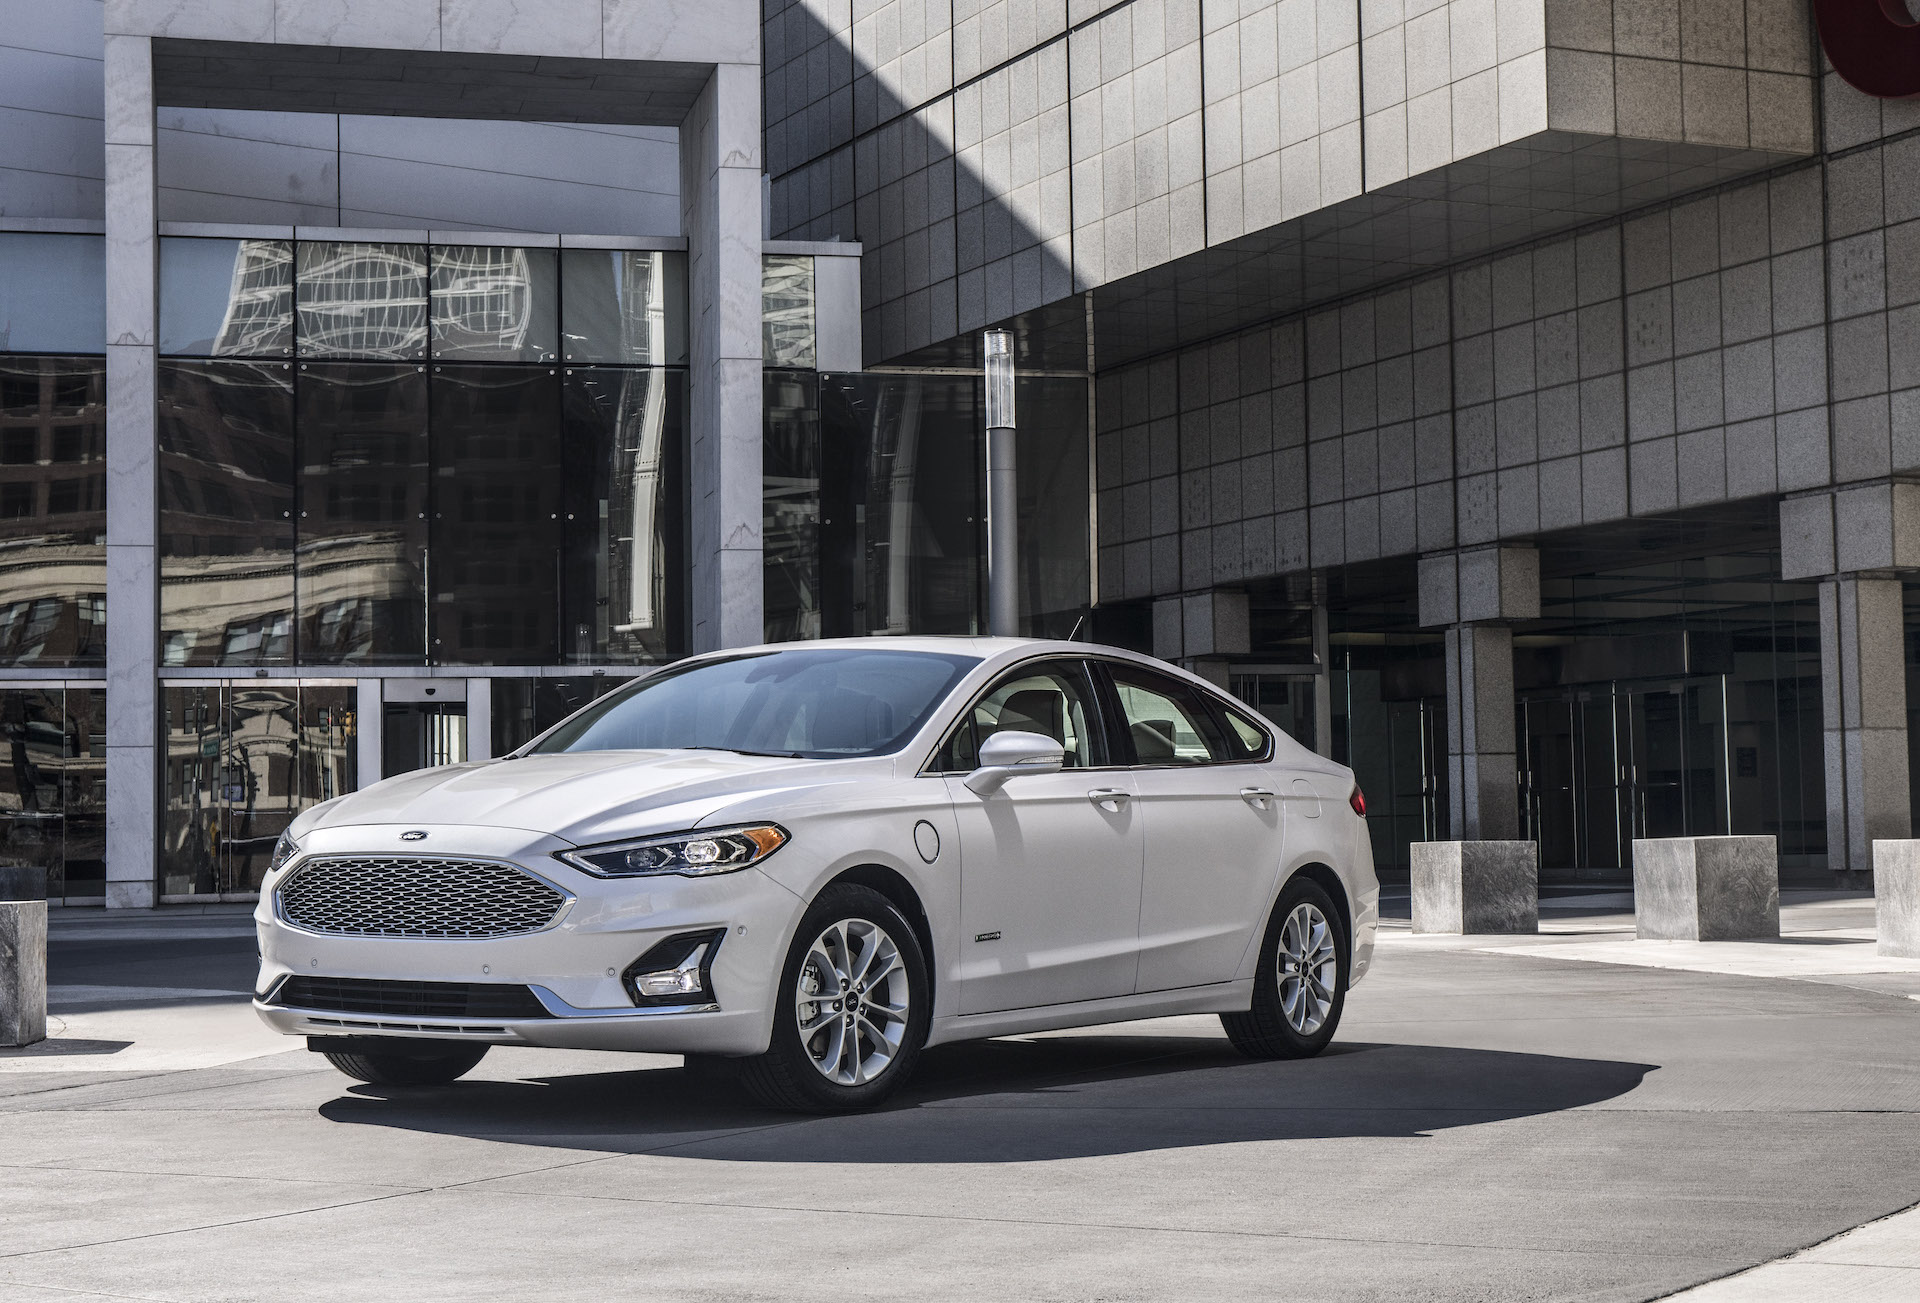 2020 Ford Fusion Review: Prices, Specs, and Photos - The Car Connection